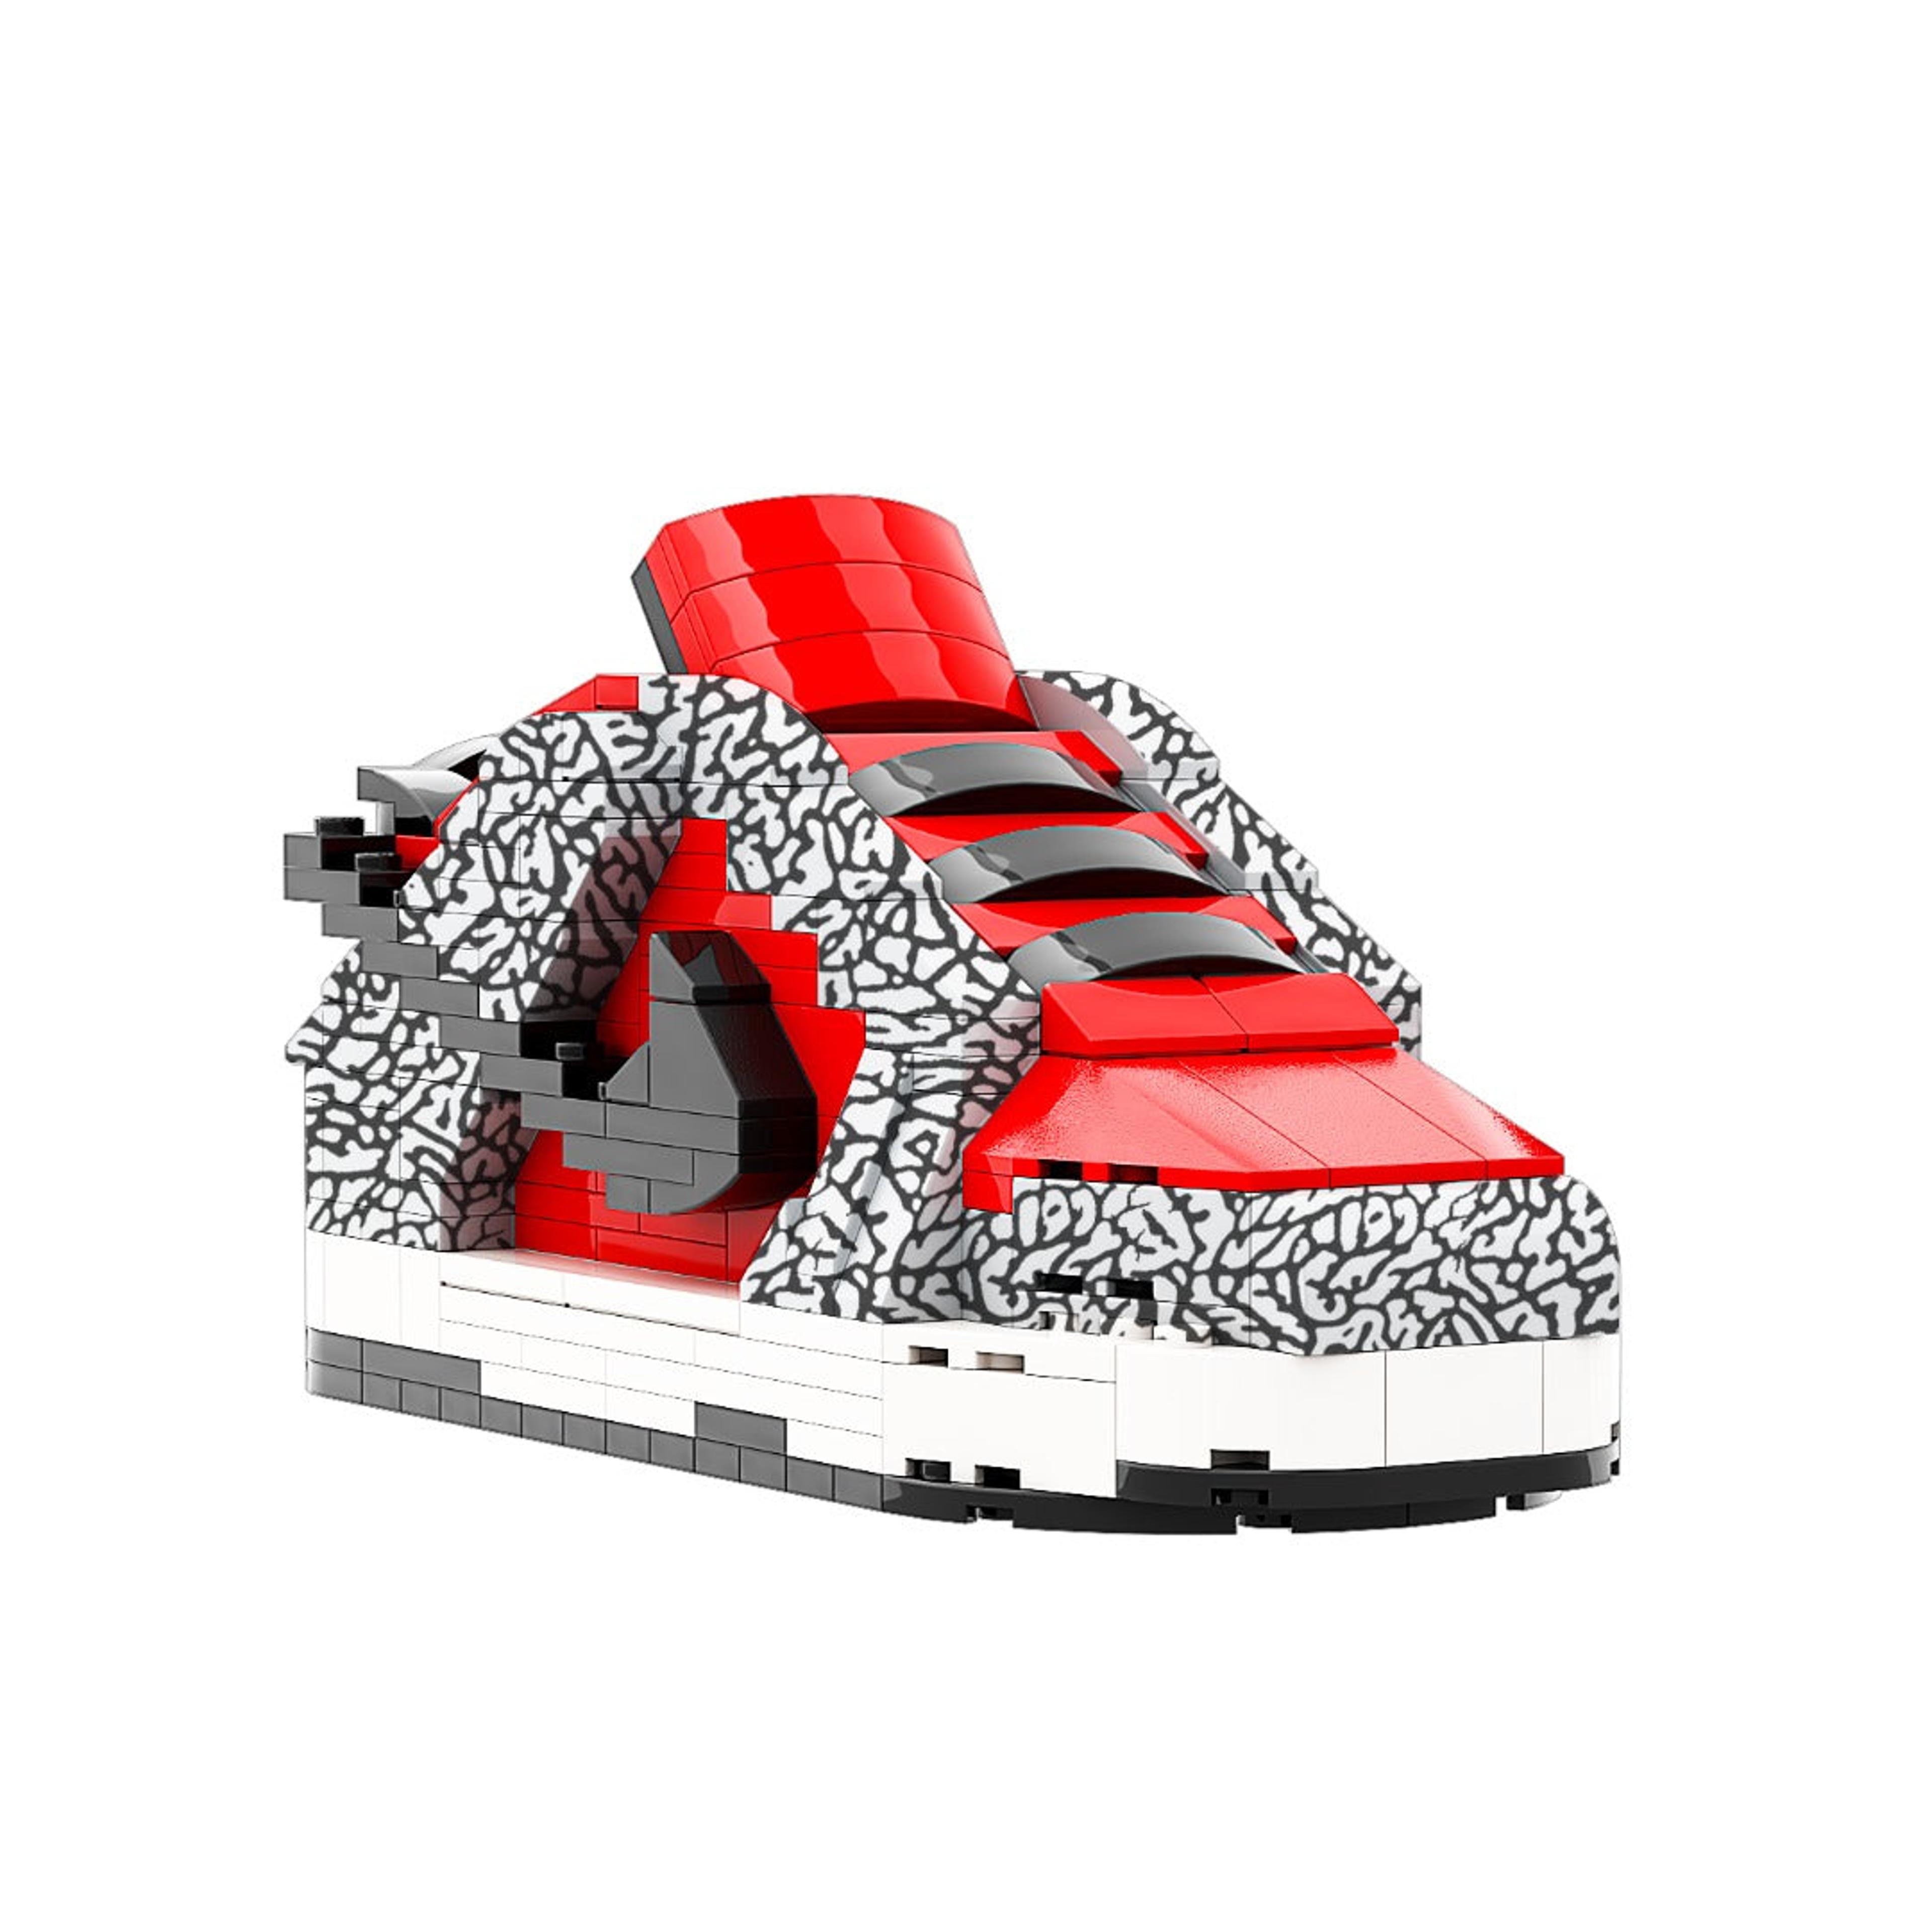 Alternate View 6 of REGULAR SB Dunk SUP "Red Cement" Sneaker Bricks with Mini Figure